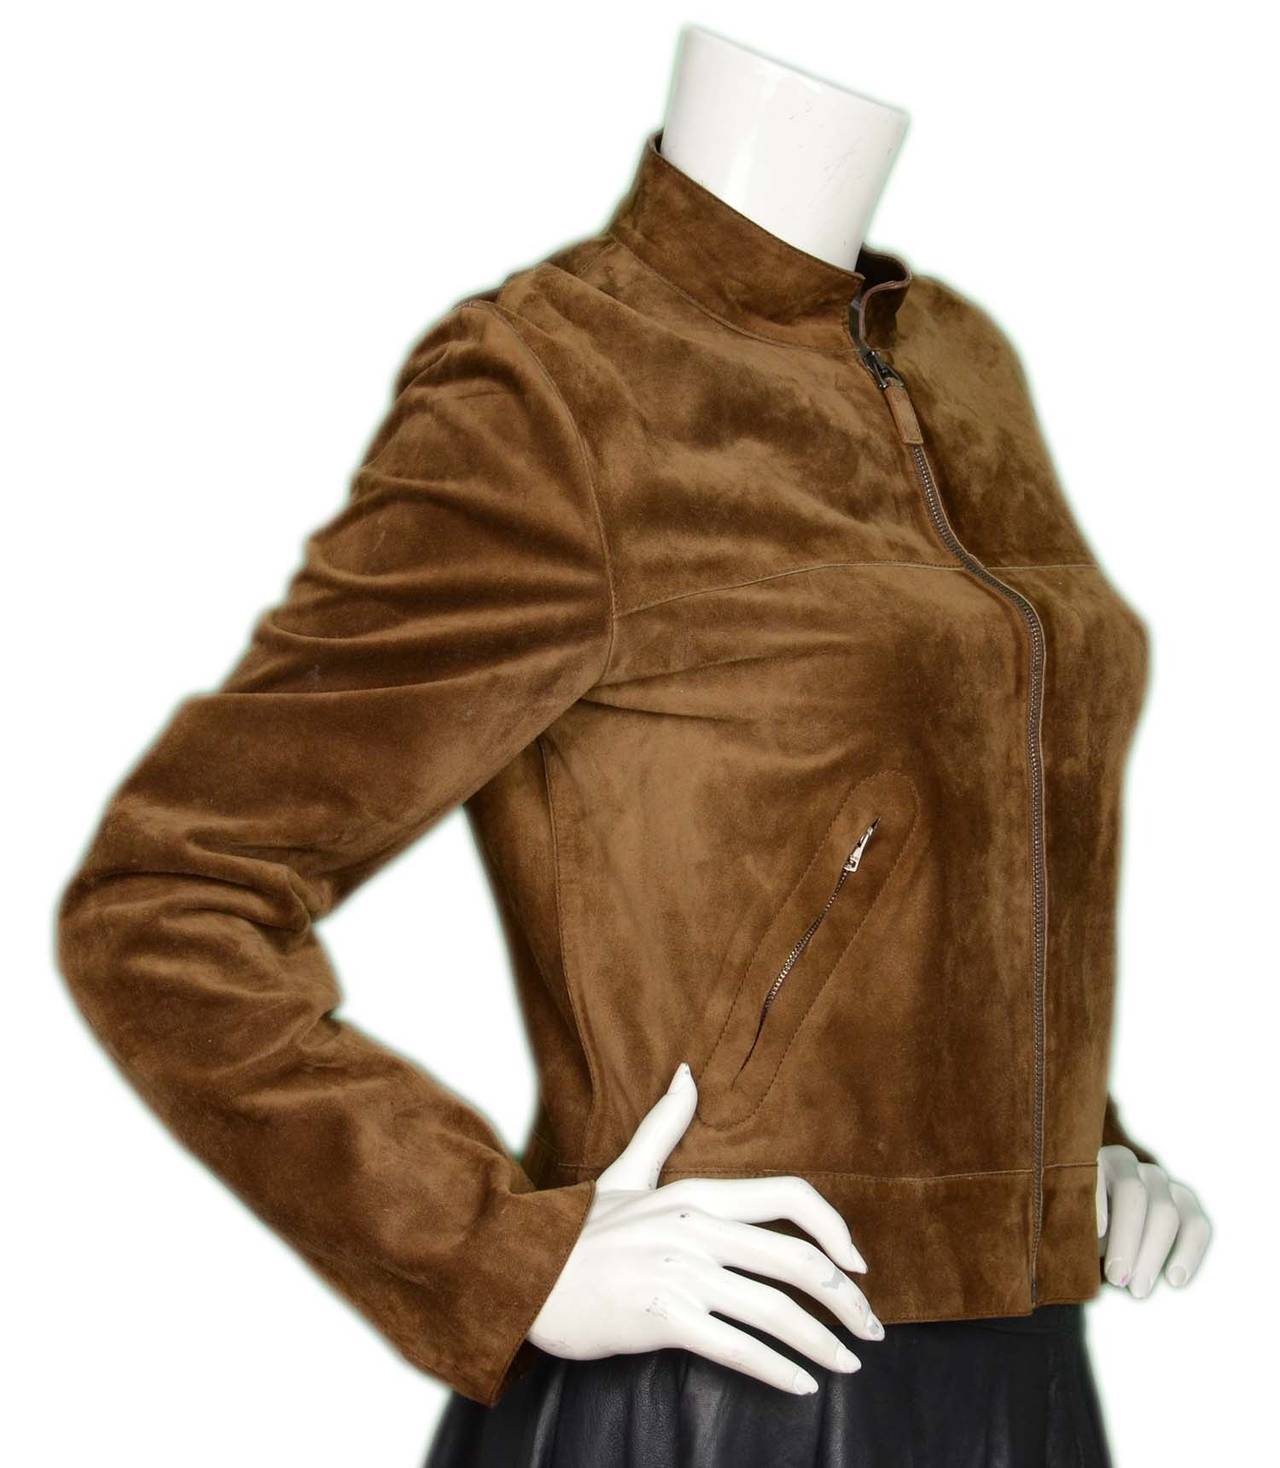 GUCCI Tan Suede Motorcycle Jacket sz. 44
Made in: Italy
Color: Tan/brown
Composition: 100% Suede
Lining: 100% Tan Leather
Closure/opening: Zipper closure
Exterior Pockets: Two zippered pockets
Overall Condition: Excellent pre-owned